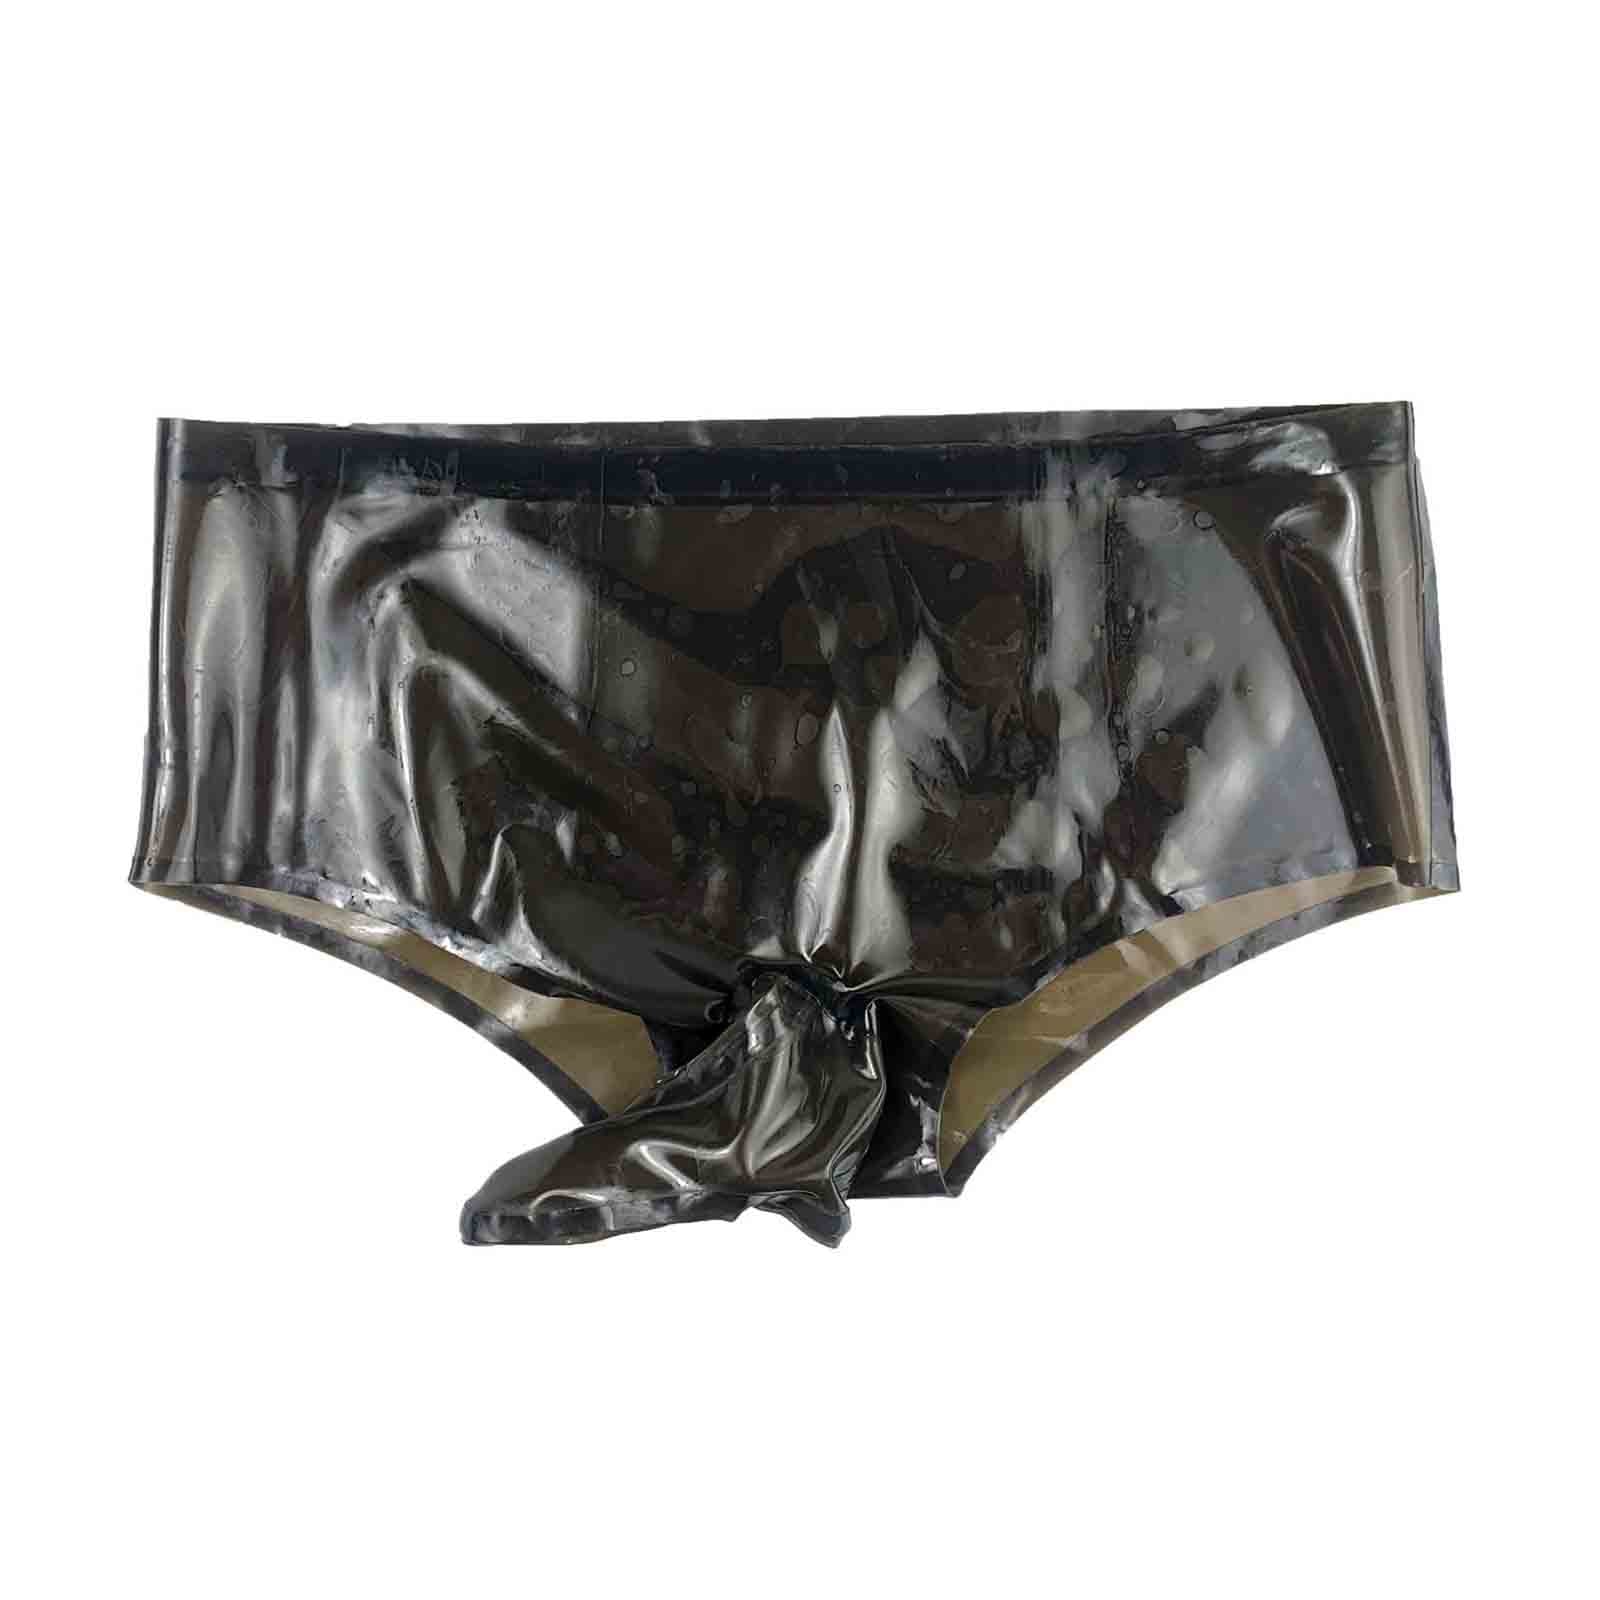 Sexy Man Rubber Latex Briefs Shorts Underwear with Hole Handmade Sex Panties  (S) Black at  Men's Clothing store